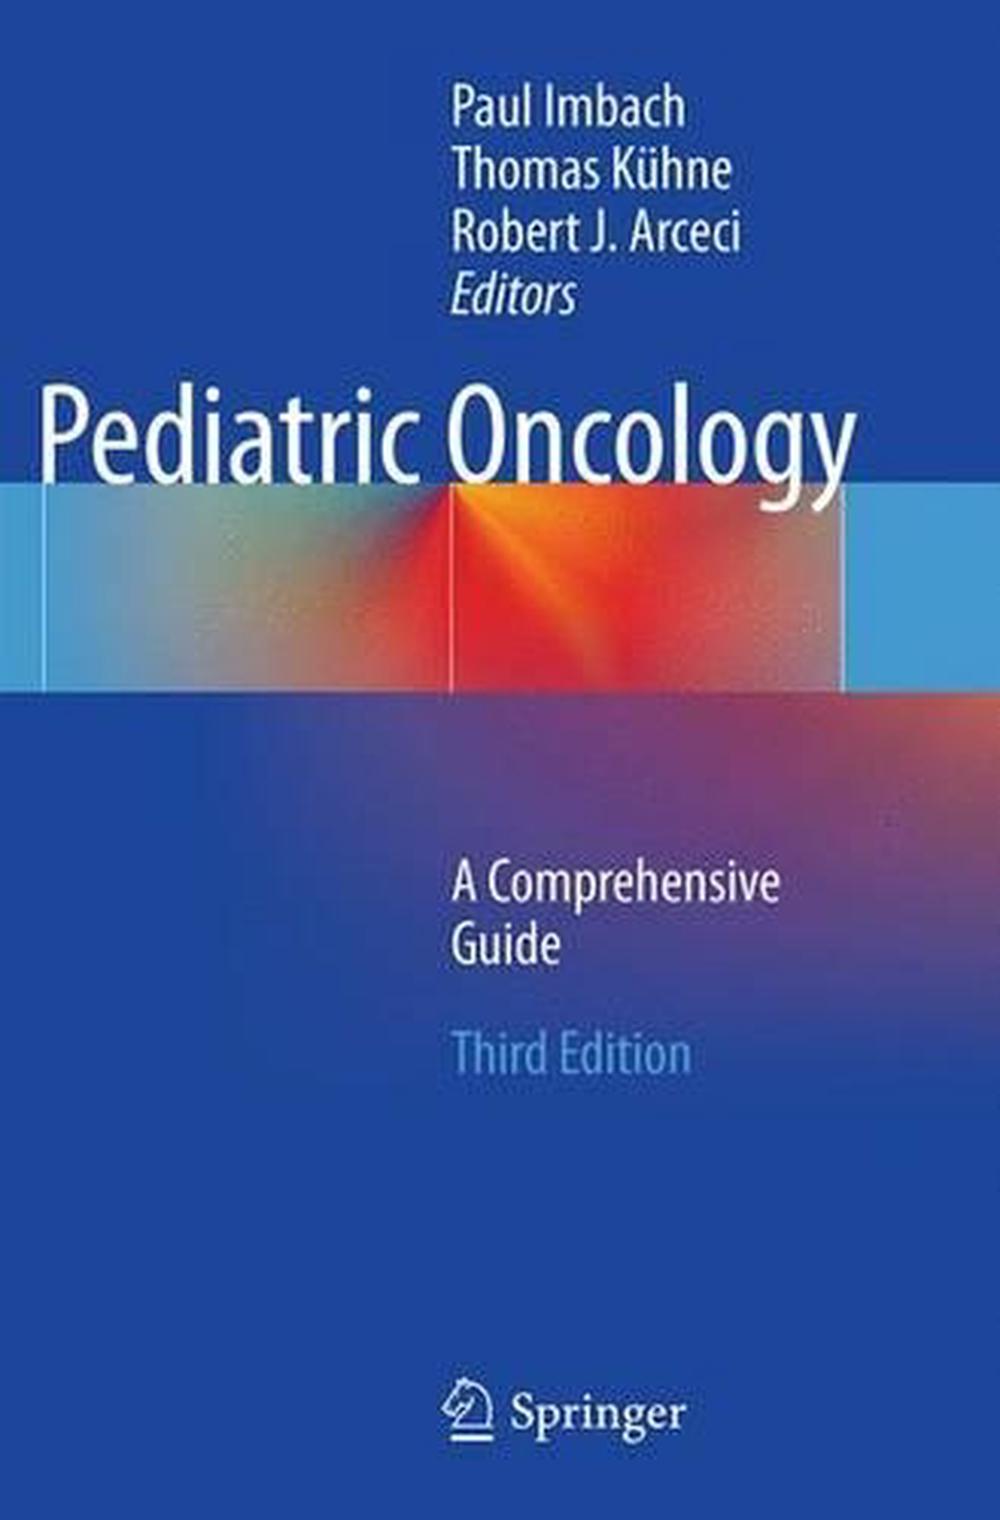 Pediatric Oncology: A Comprehensive Guide (English) Paperback Book Free ...